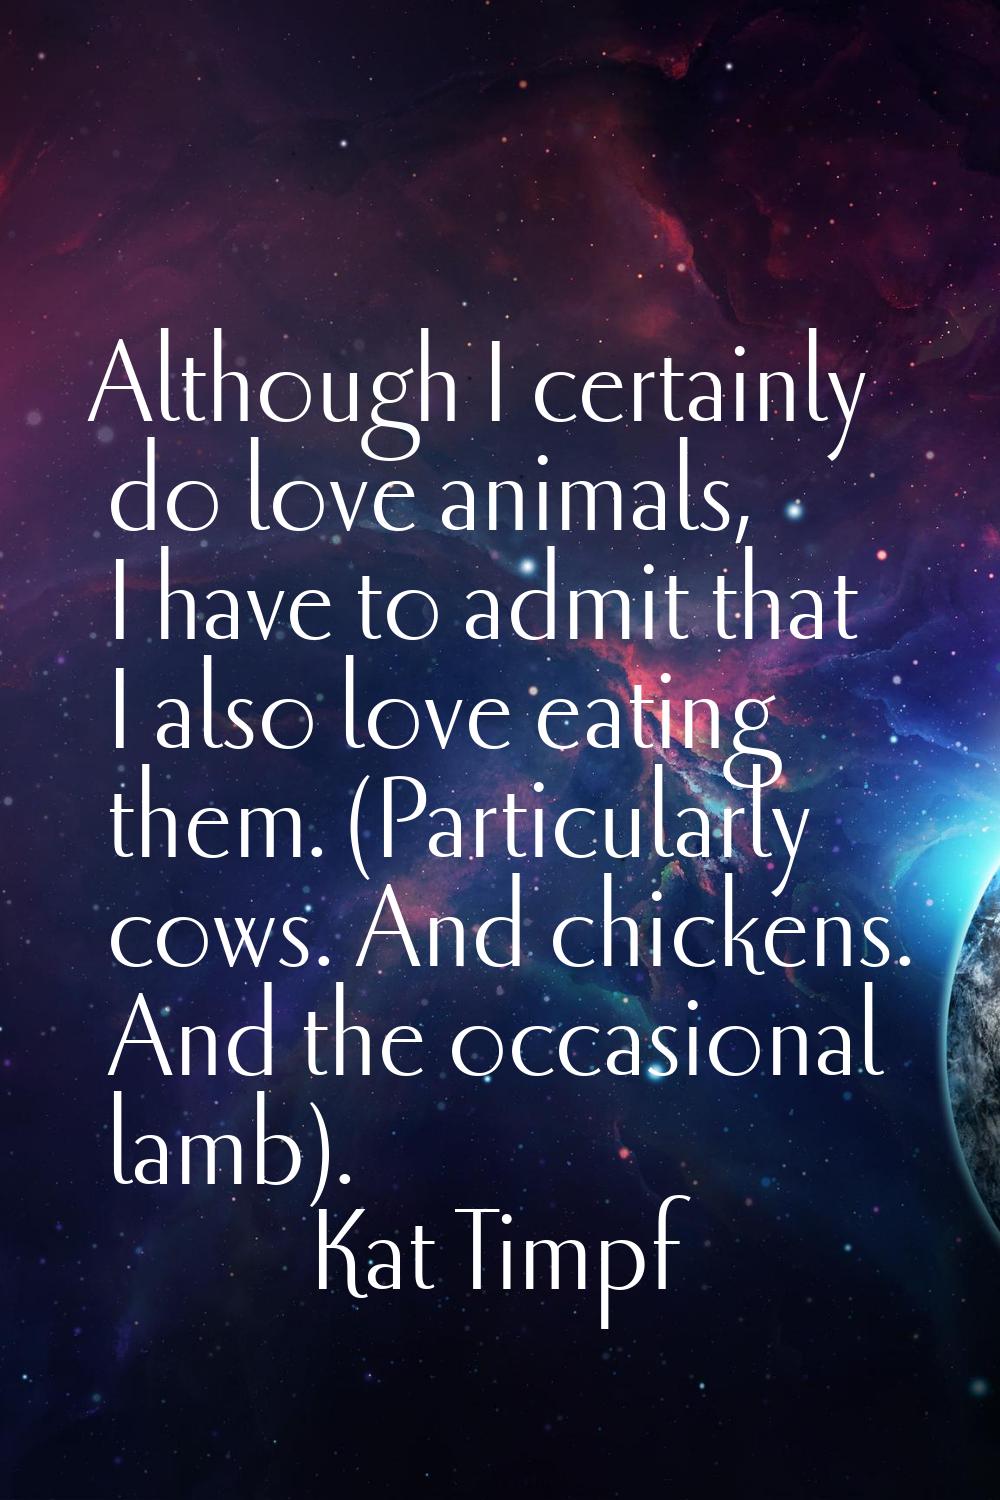 Although I certainly do love animals, I have to admit that I also love eating them. (Particularly c